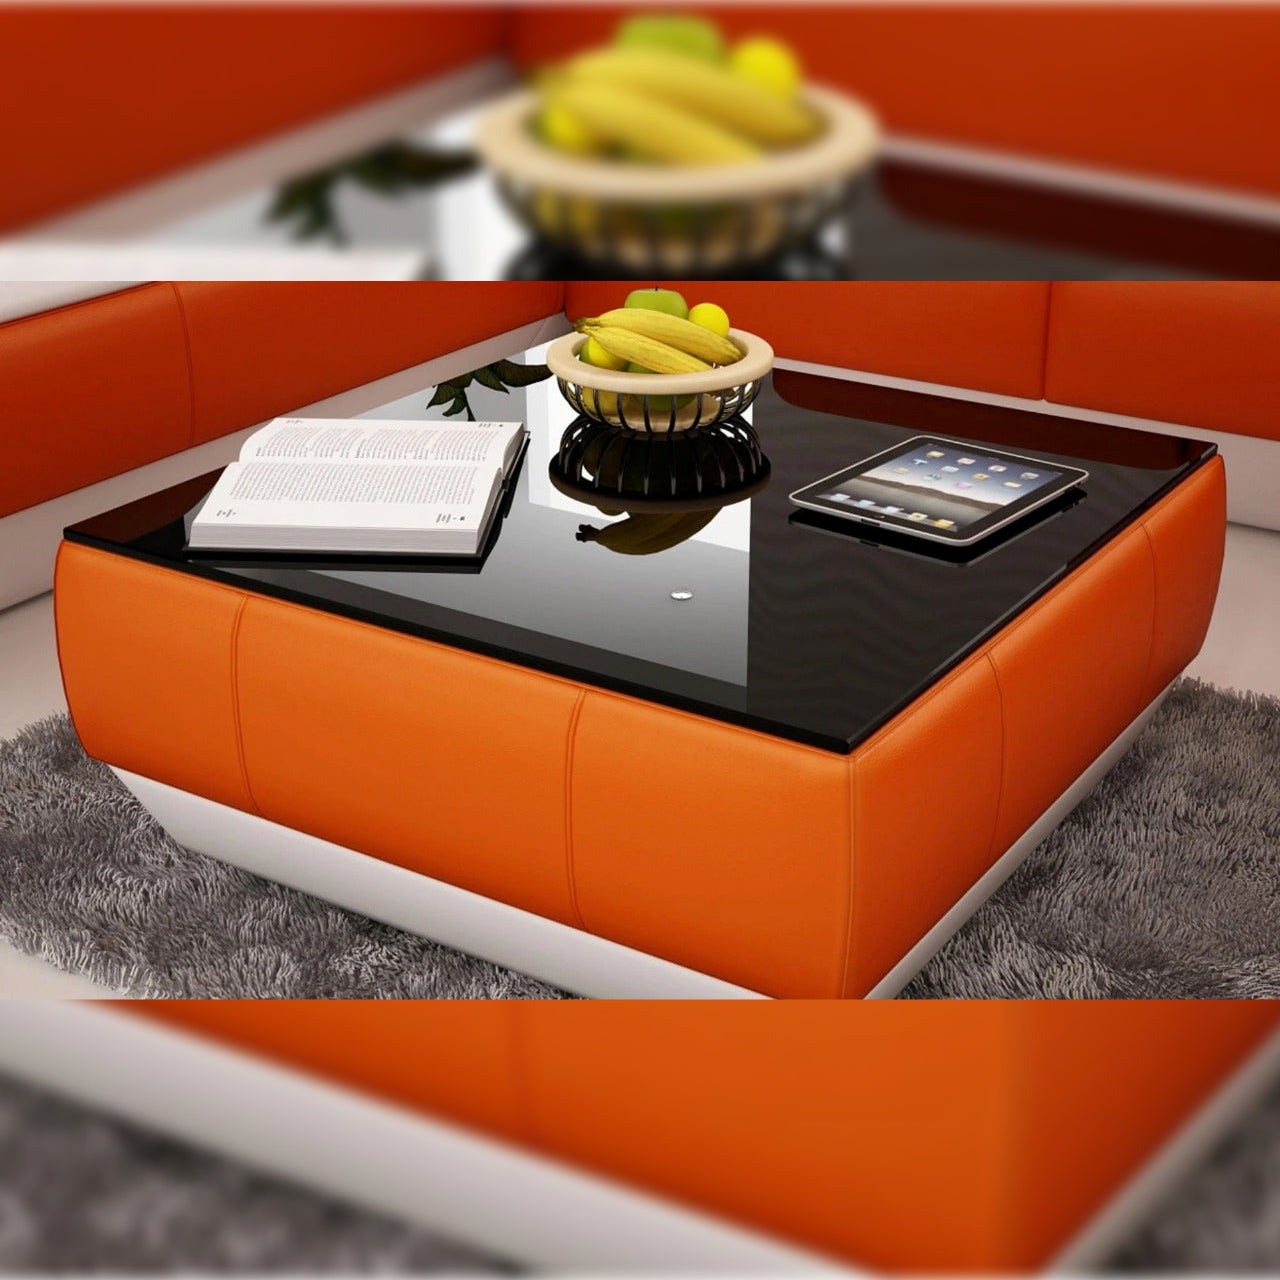 Leatherette Coffee Table Contemporary Orange and White Leatherette Coffee Table WBlack Glass Table Top